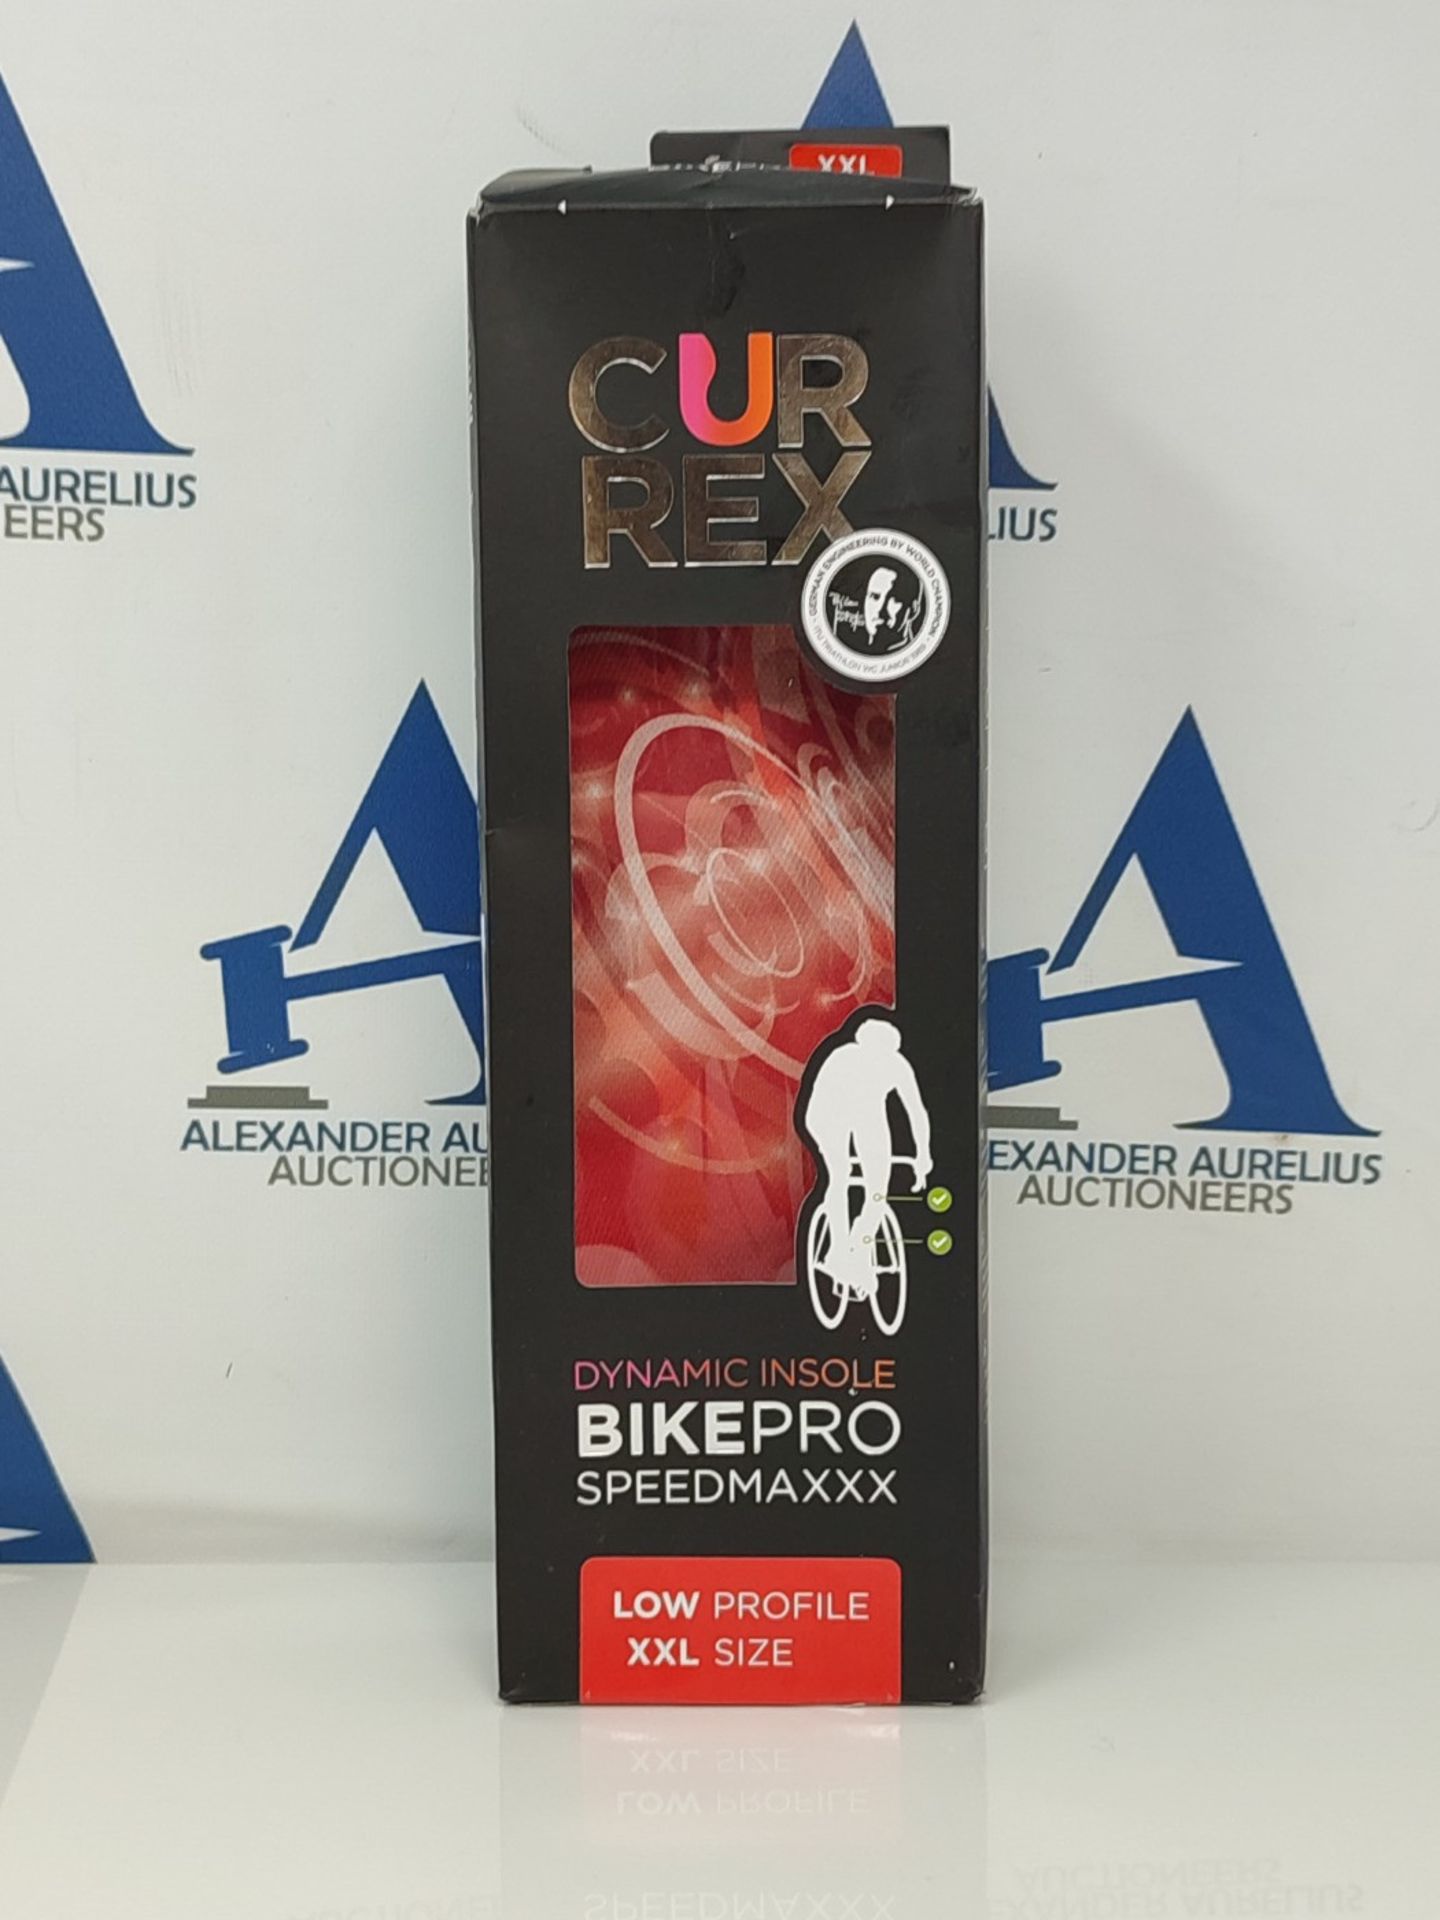 RRP £69.00 CURREX BikePro Sole - Your New Dimension in Biking. Dynamic Performance Insole for Cyc - Image 2 of 3